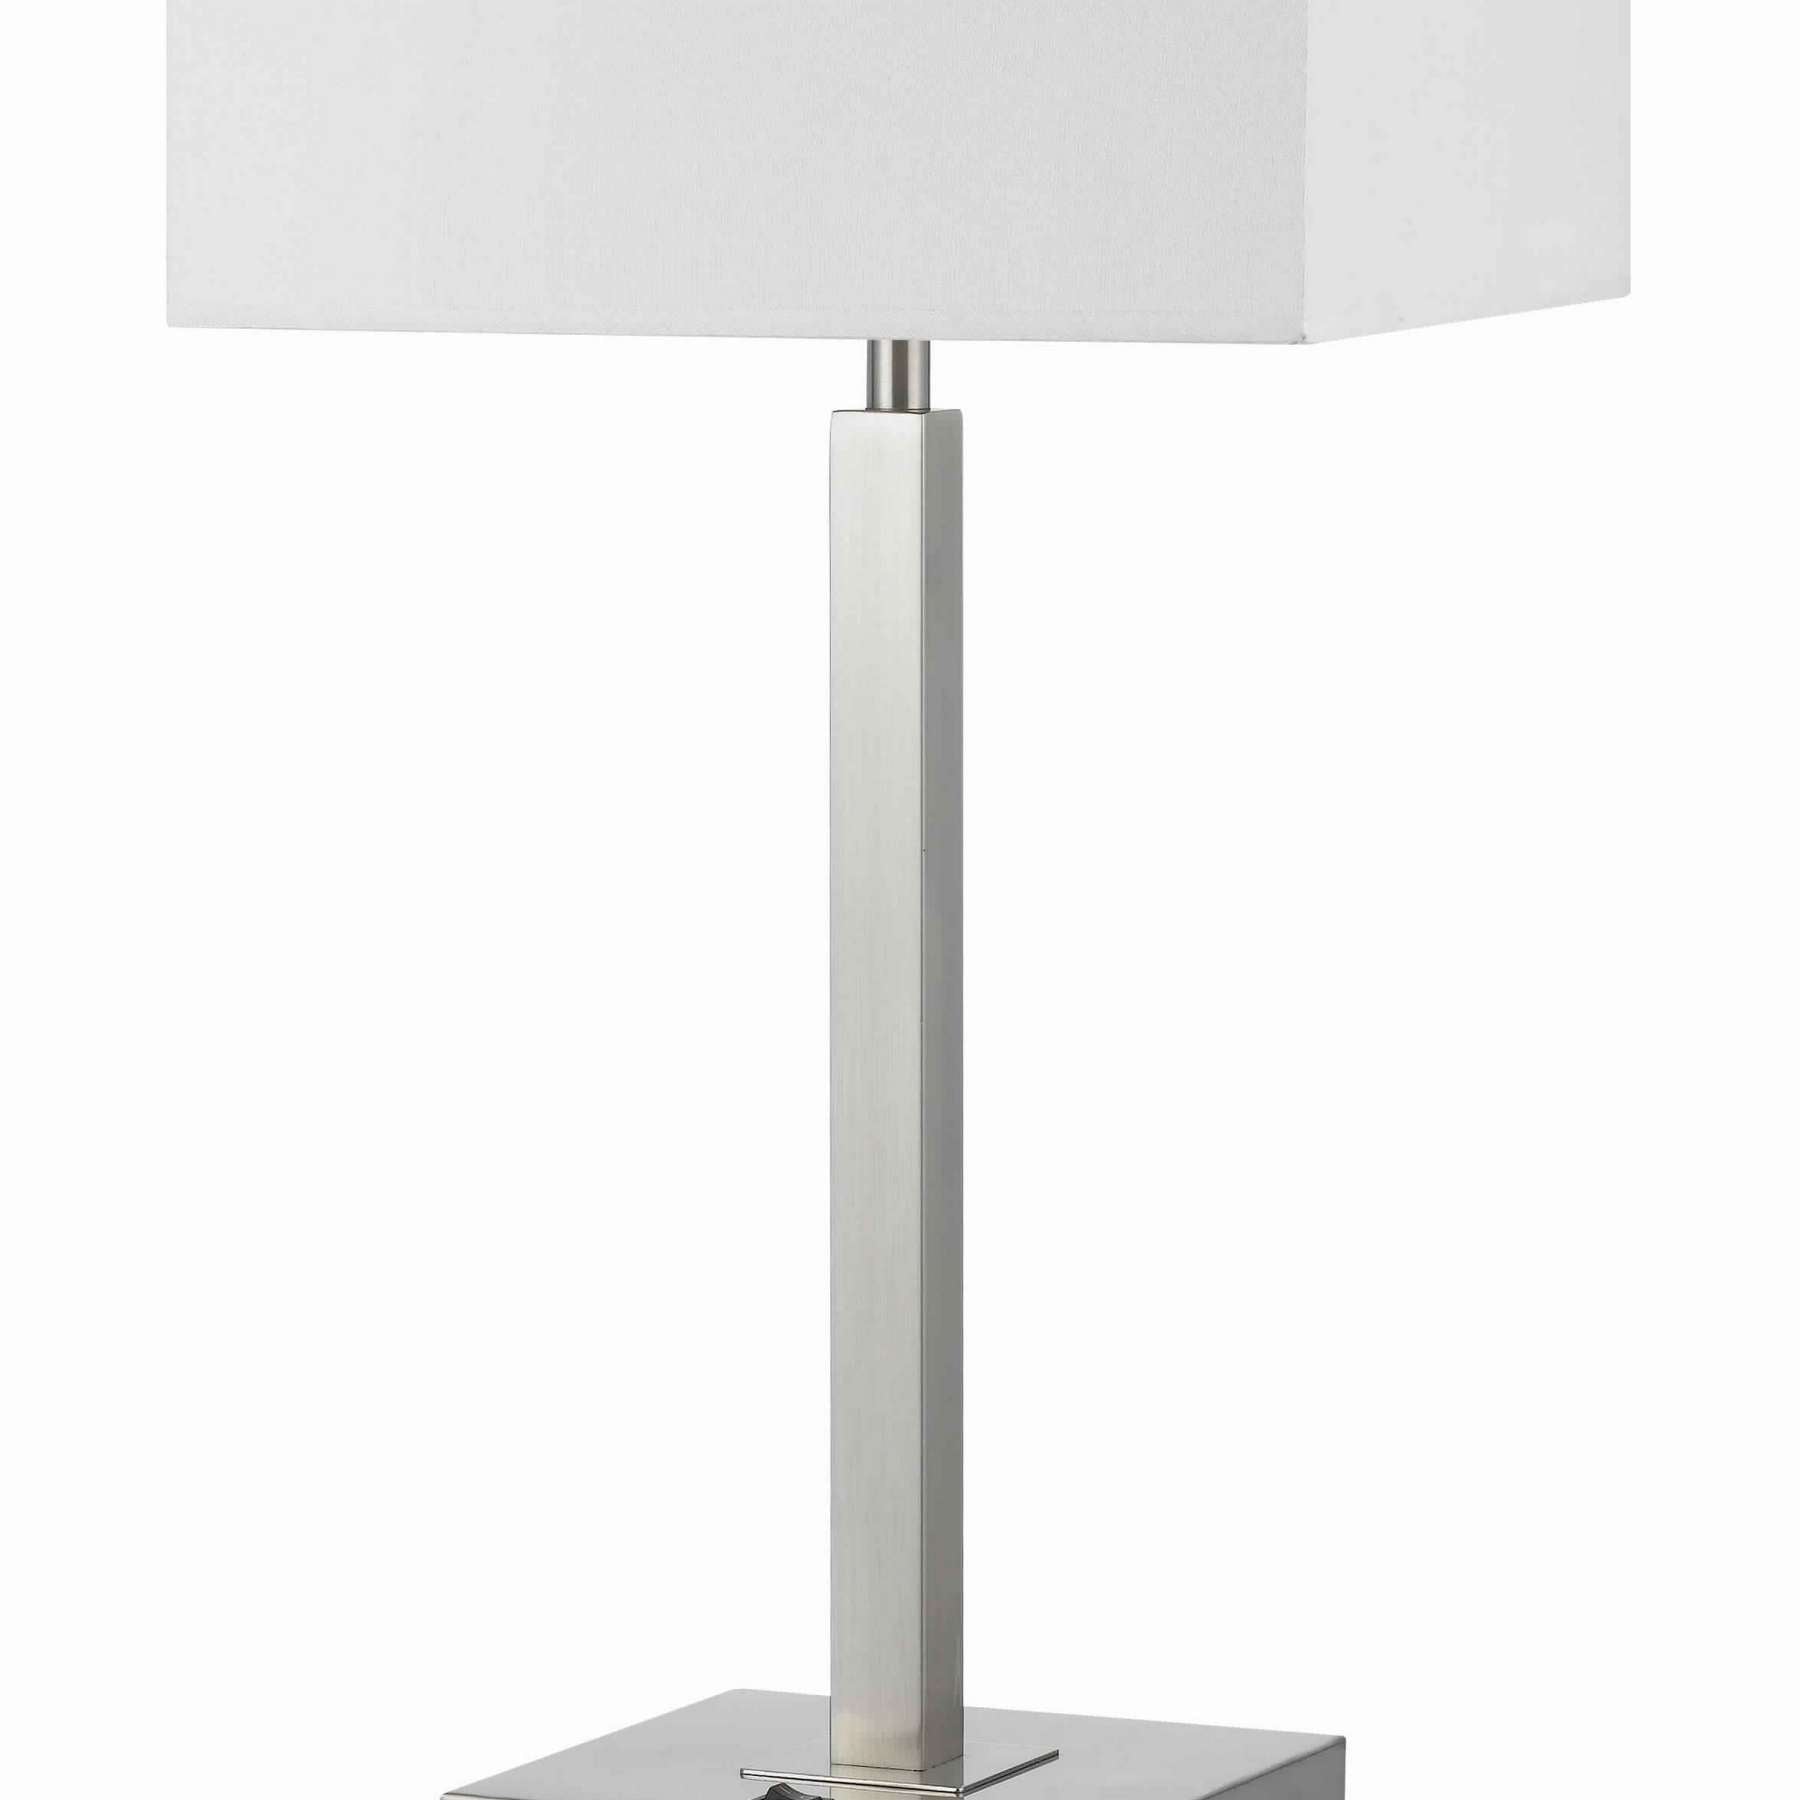 Benzara Rectangular Metal Table Lamp With Tubular Base And 2 Power Outlet, White By Benzara Table Lamps BM224691